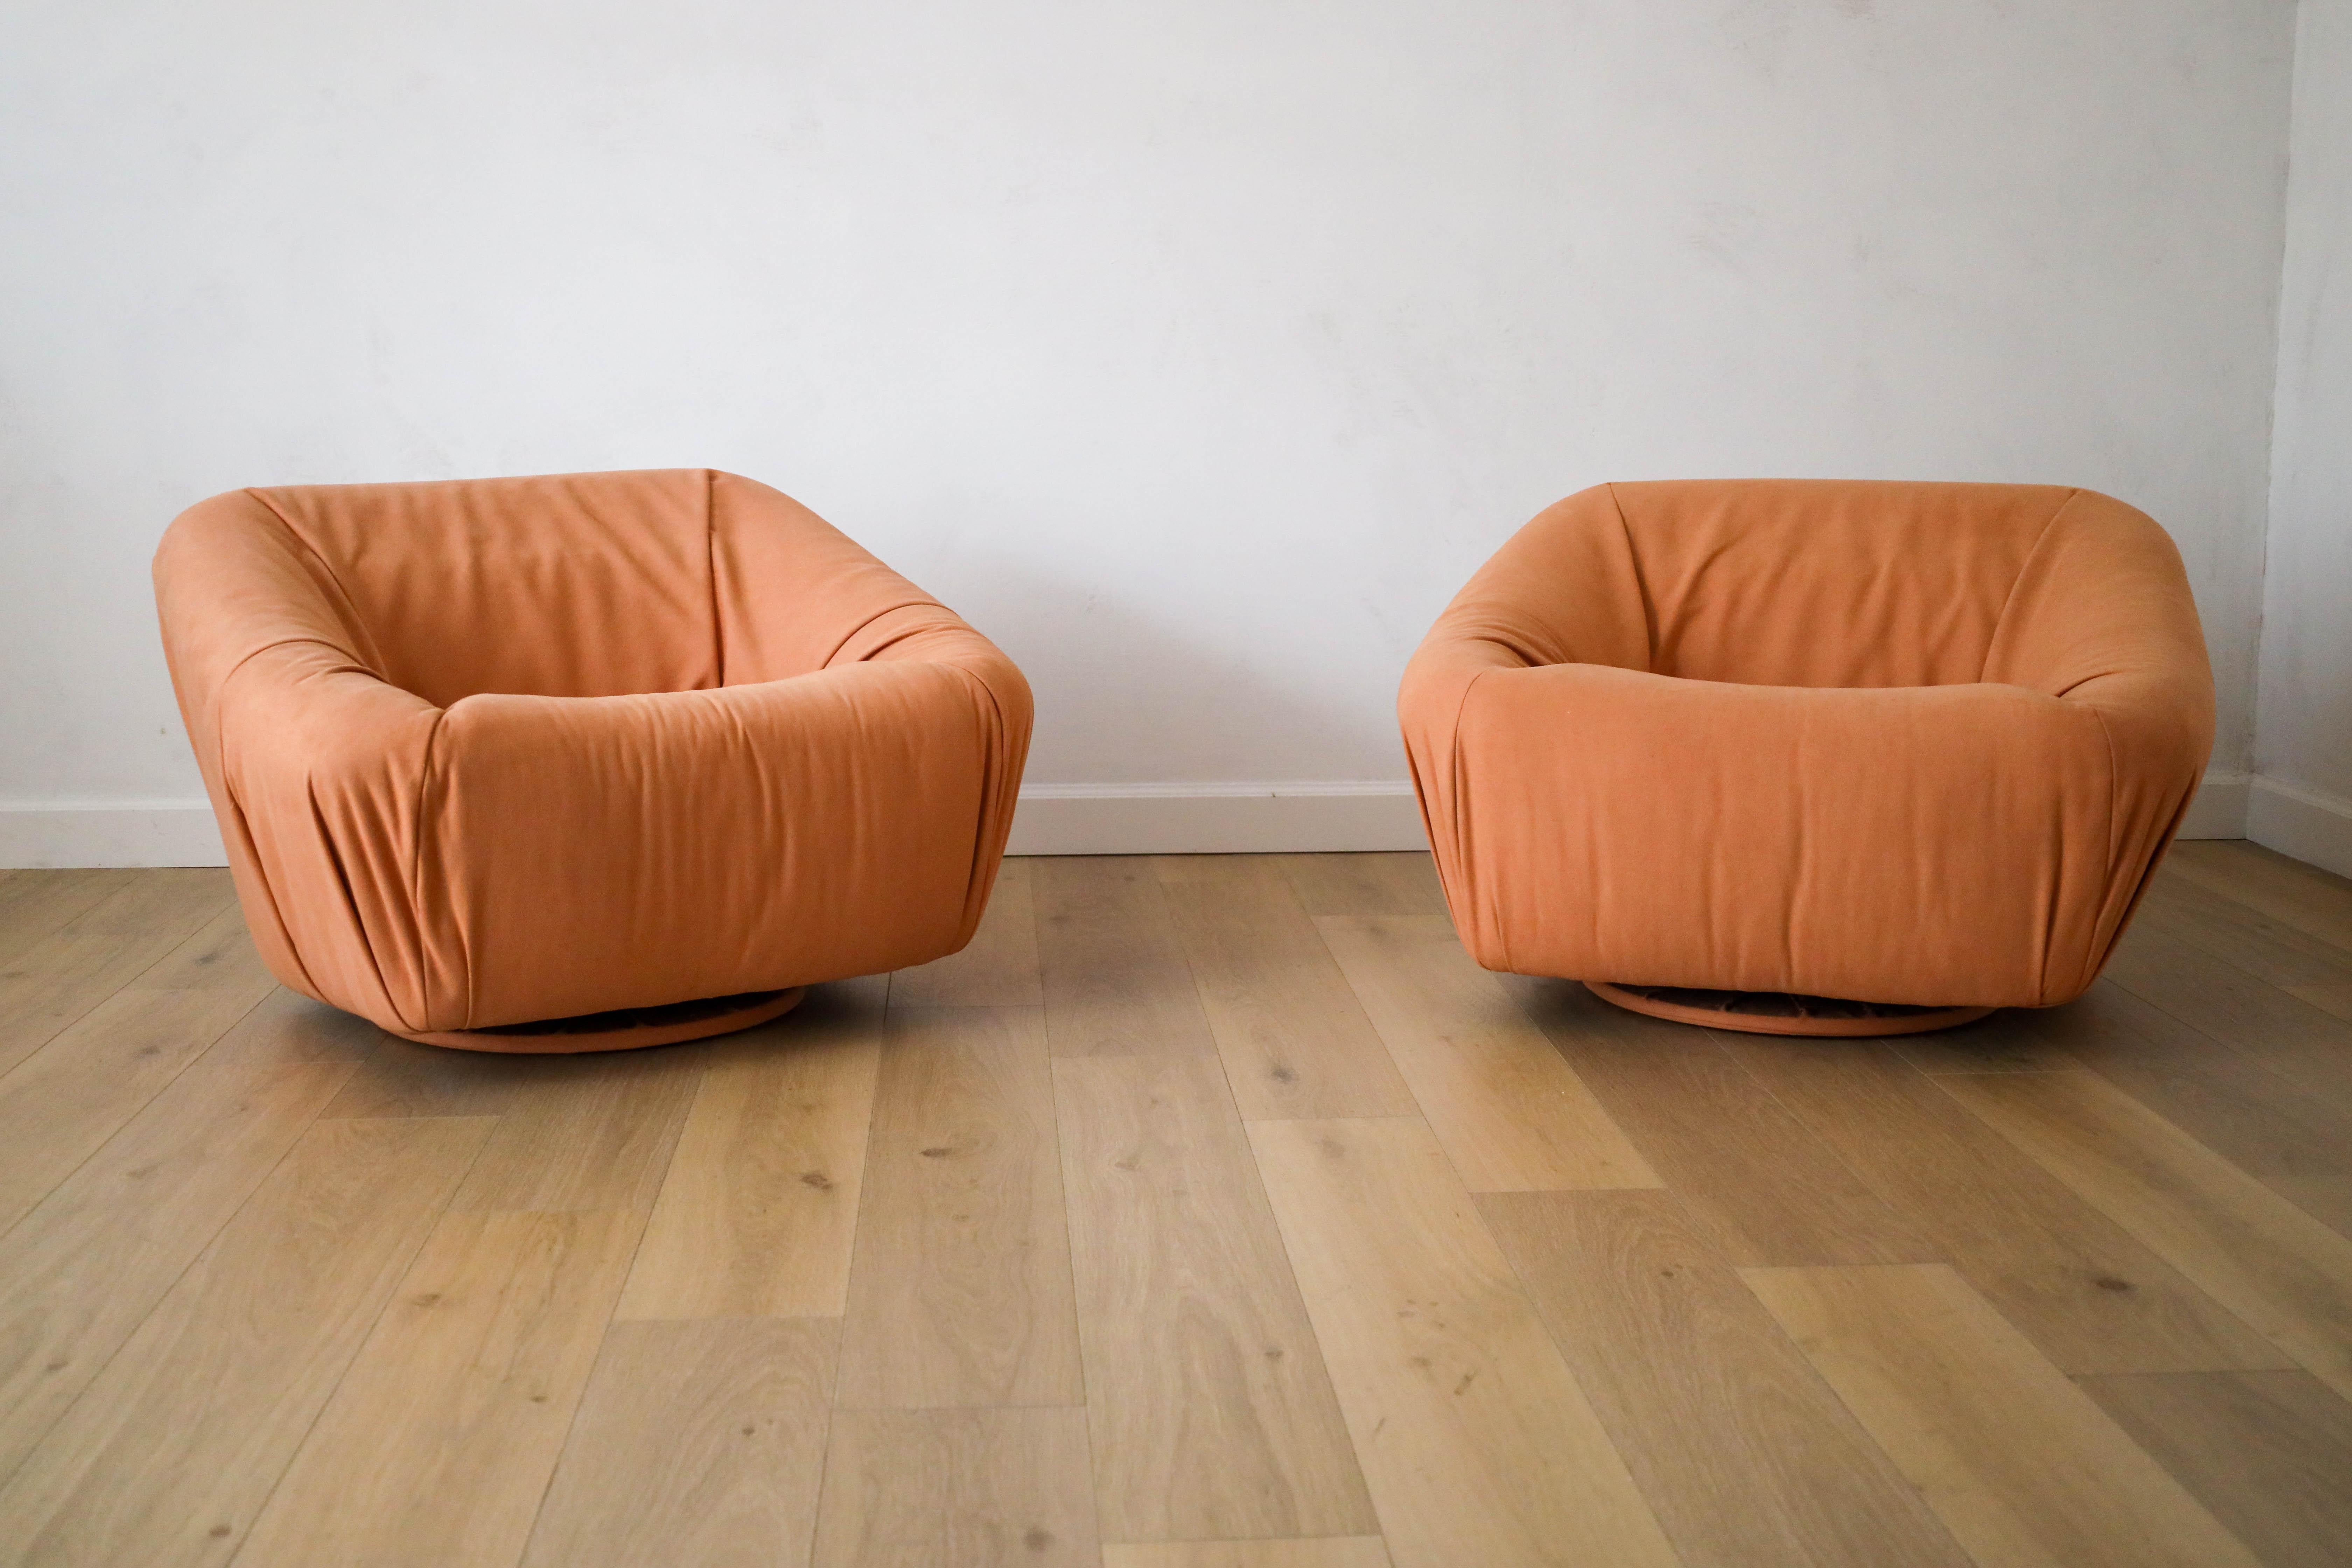 Vintage Pair 1950s European Swivel Chairs, Suede upholstery by The Romo Group In Excellent Condition For Sale In Dallas, TX